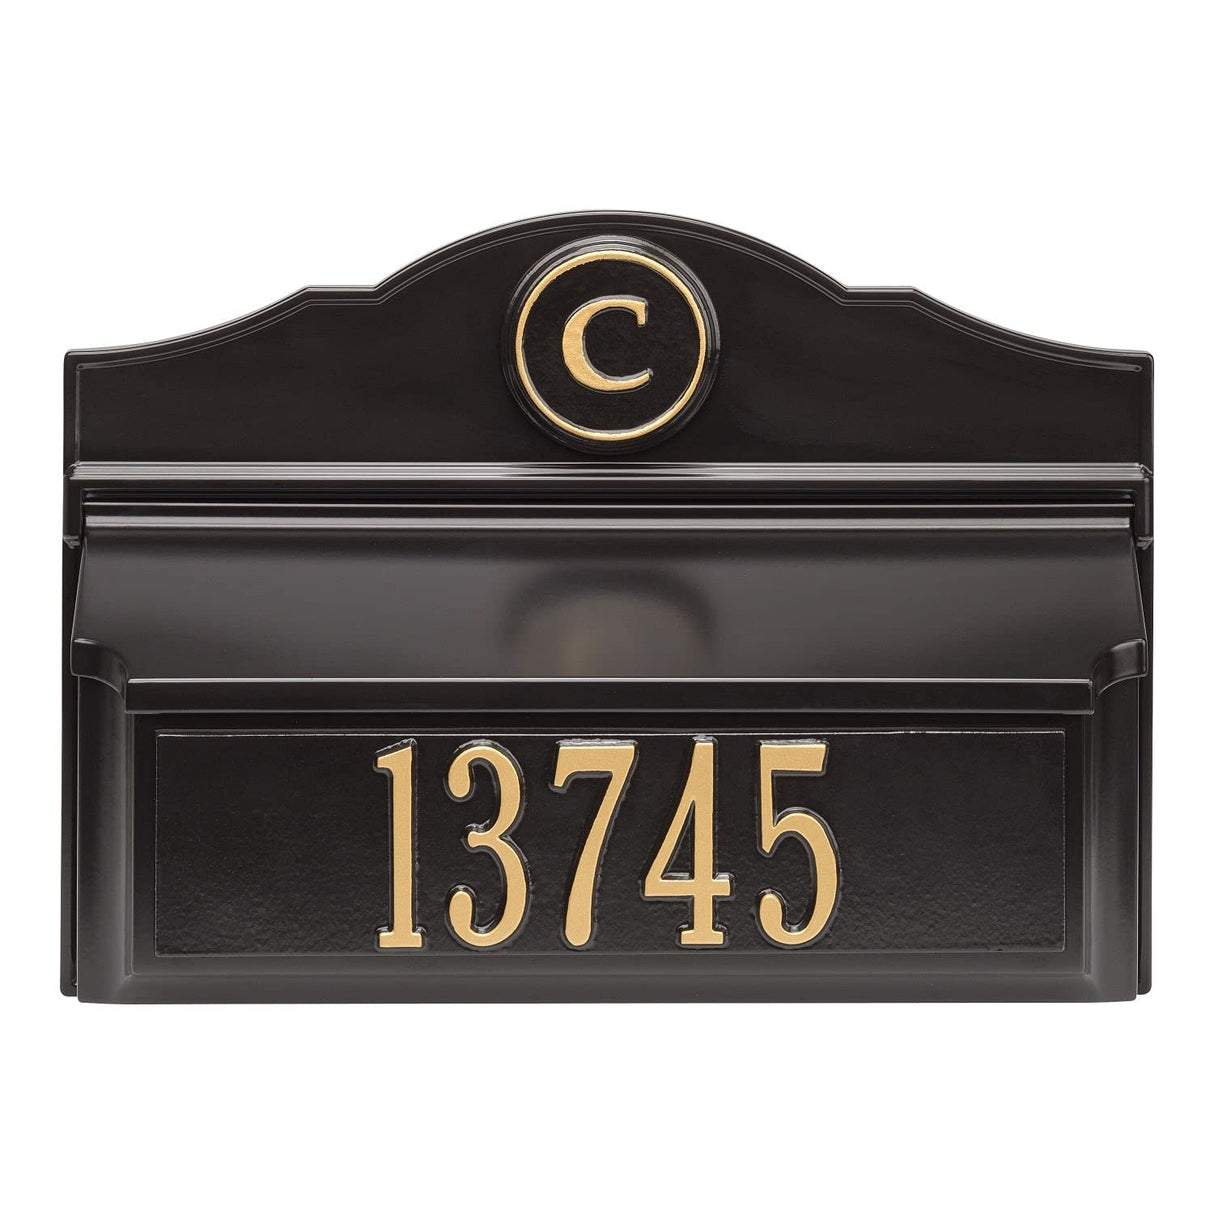 Whitehall 11246 - Colonial Wall Mailbox Package #1 (Mailbox, Plaque & Monogram)